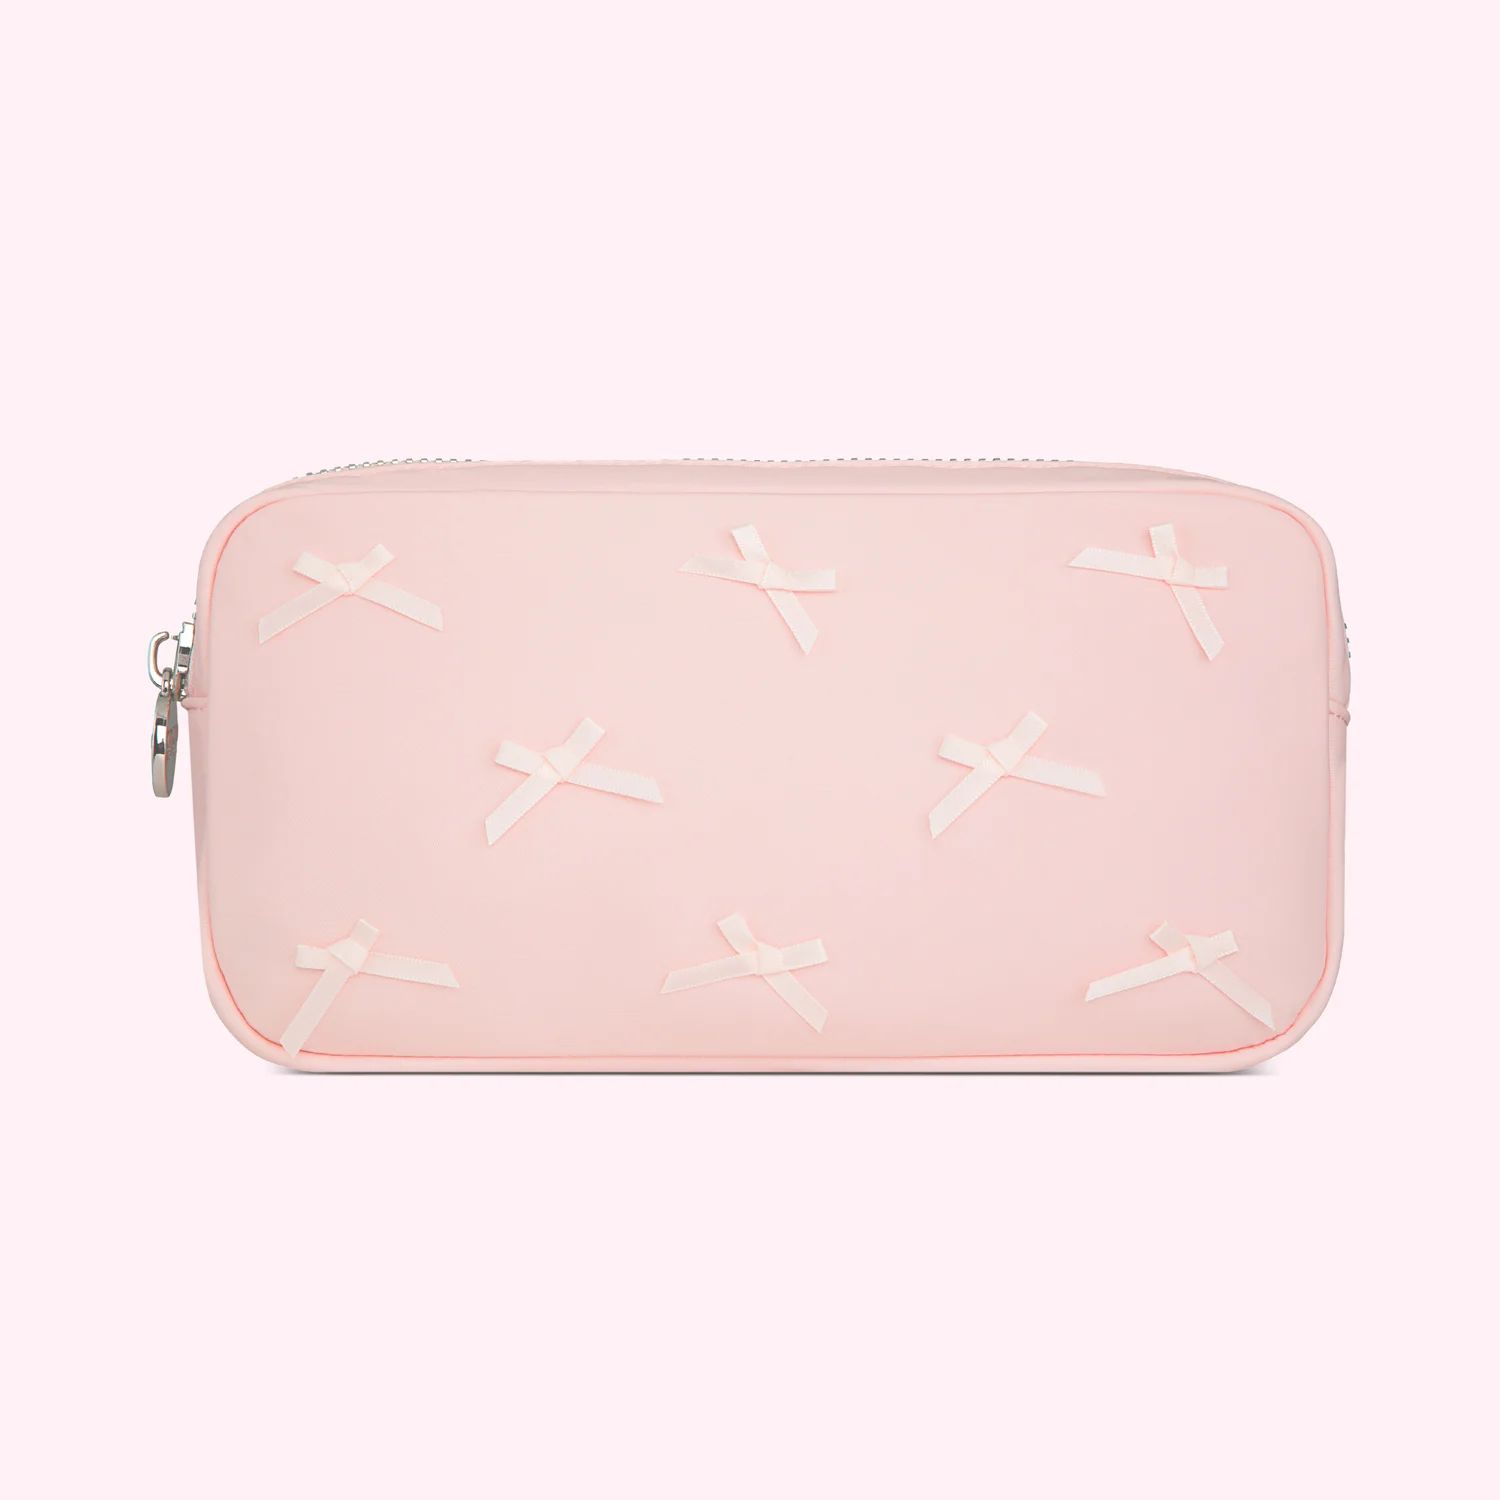 Small Pouch with Bows Organization Bag | Stoney Clover Lane | Stoney Clover Lane